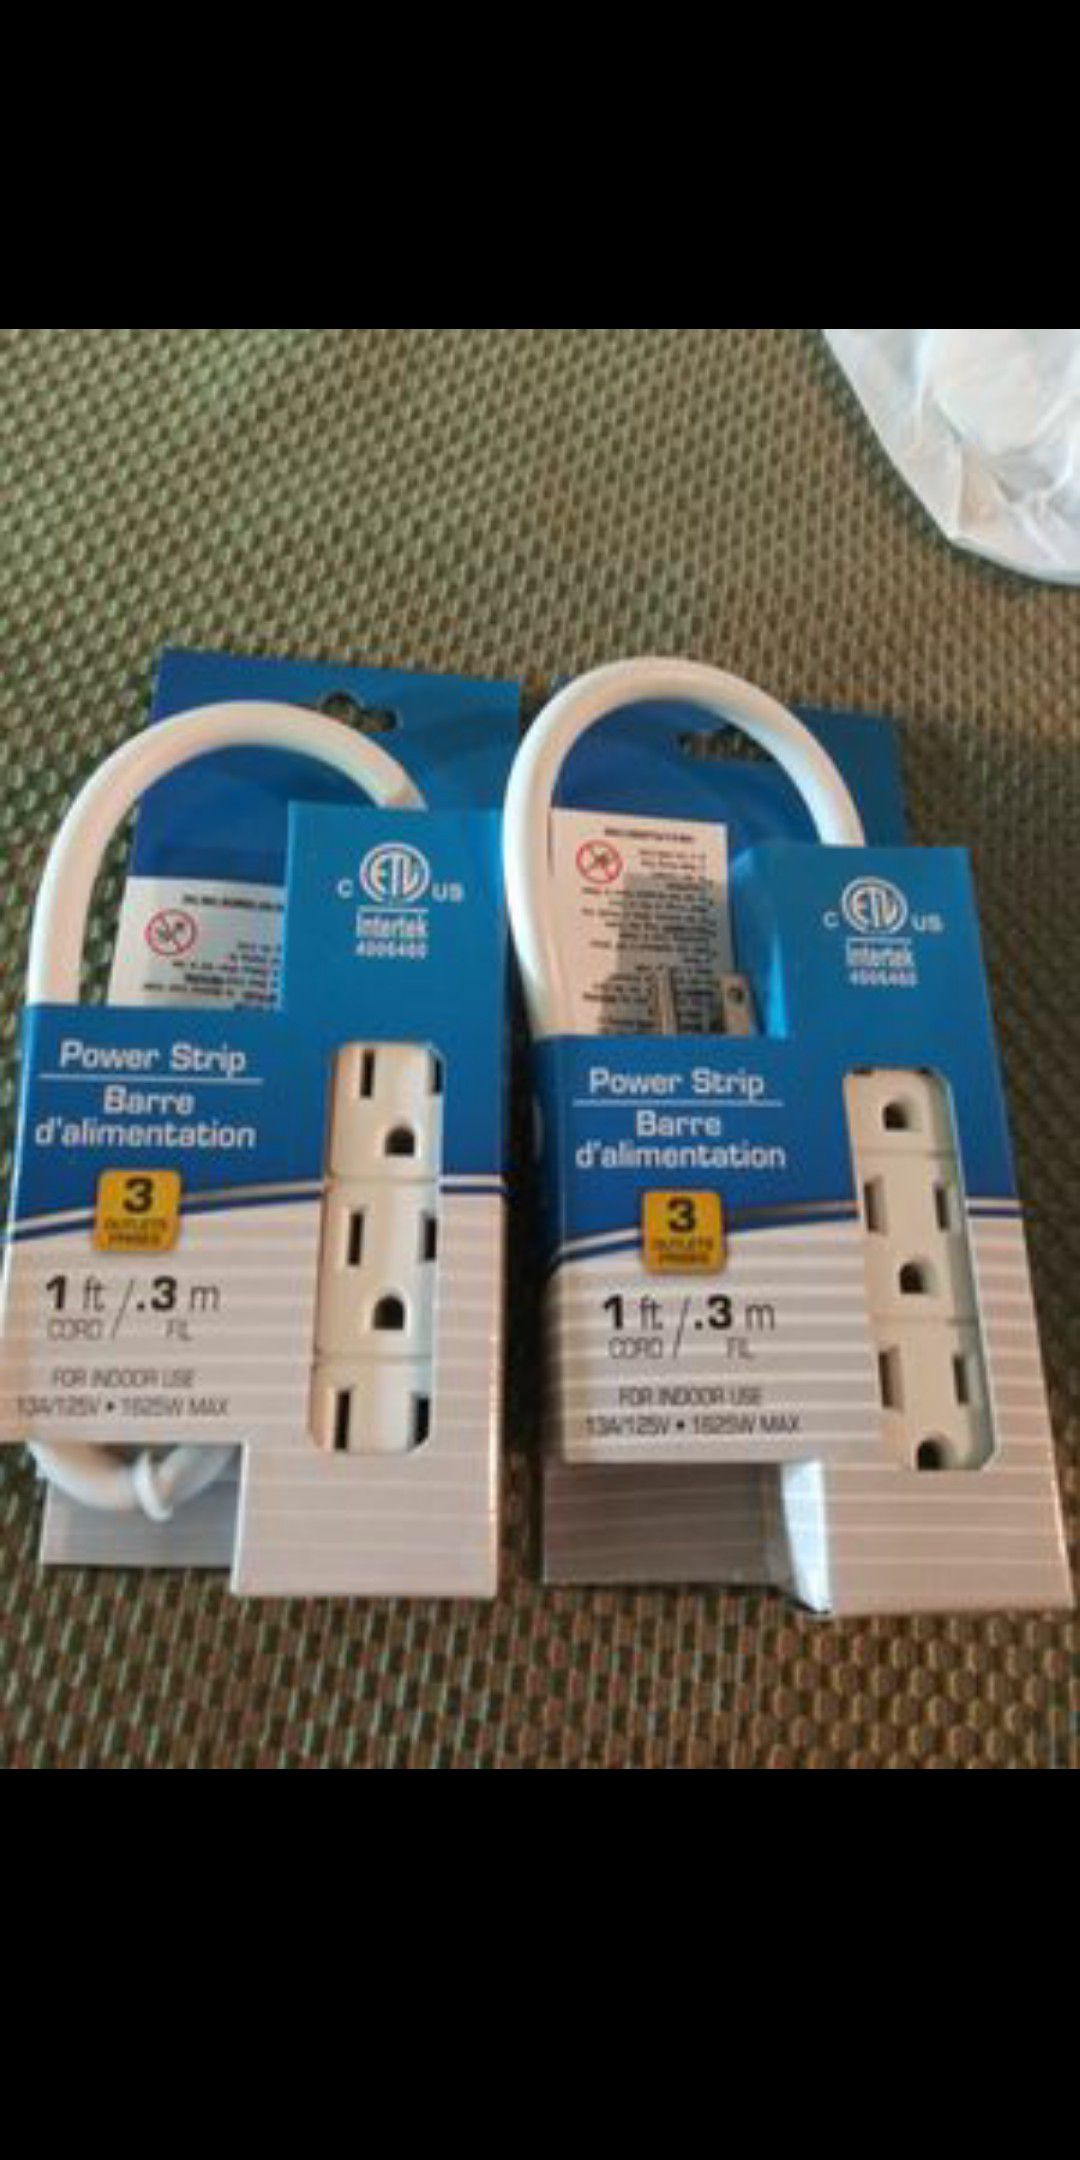 Set of 2. 1 foot-3 outlet power cord. New on box. No lowball offers please.